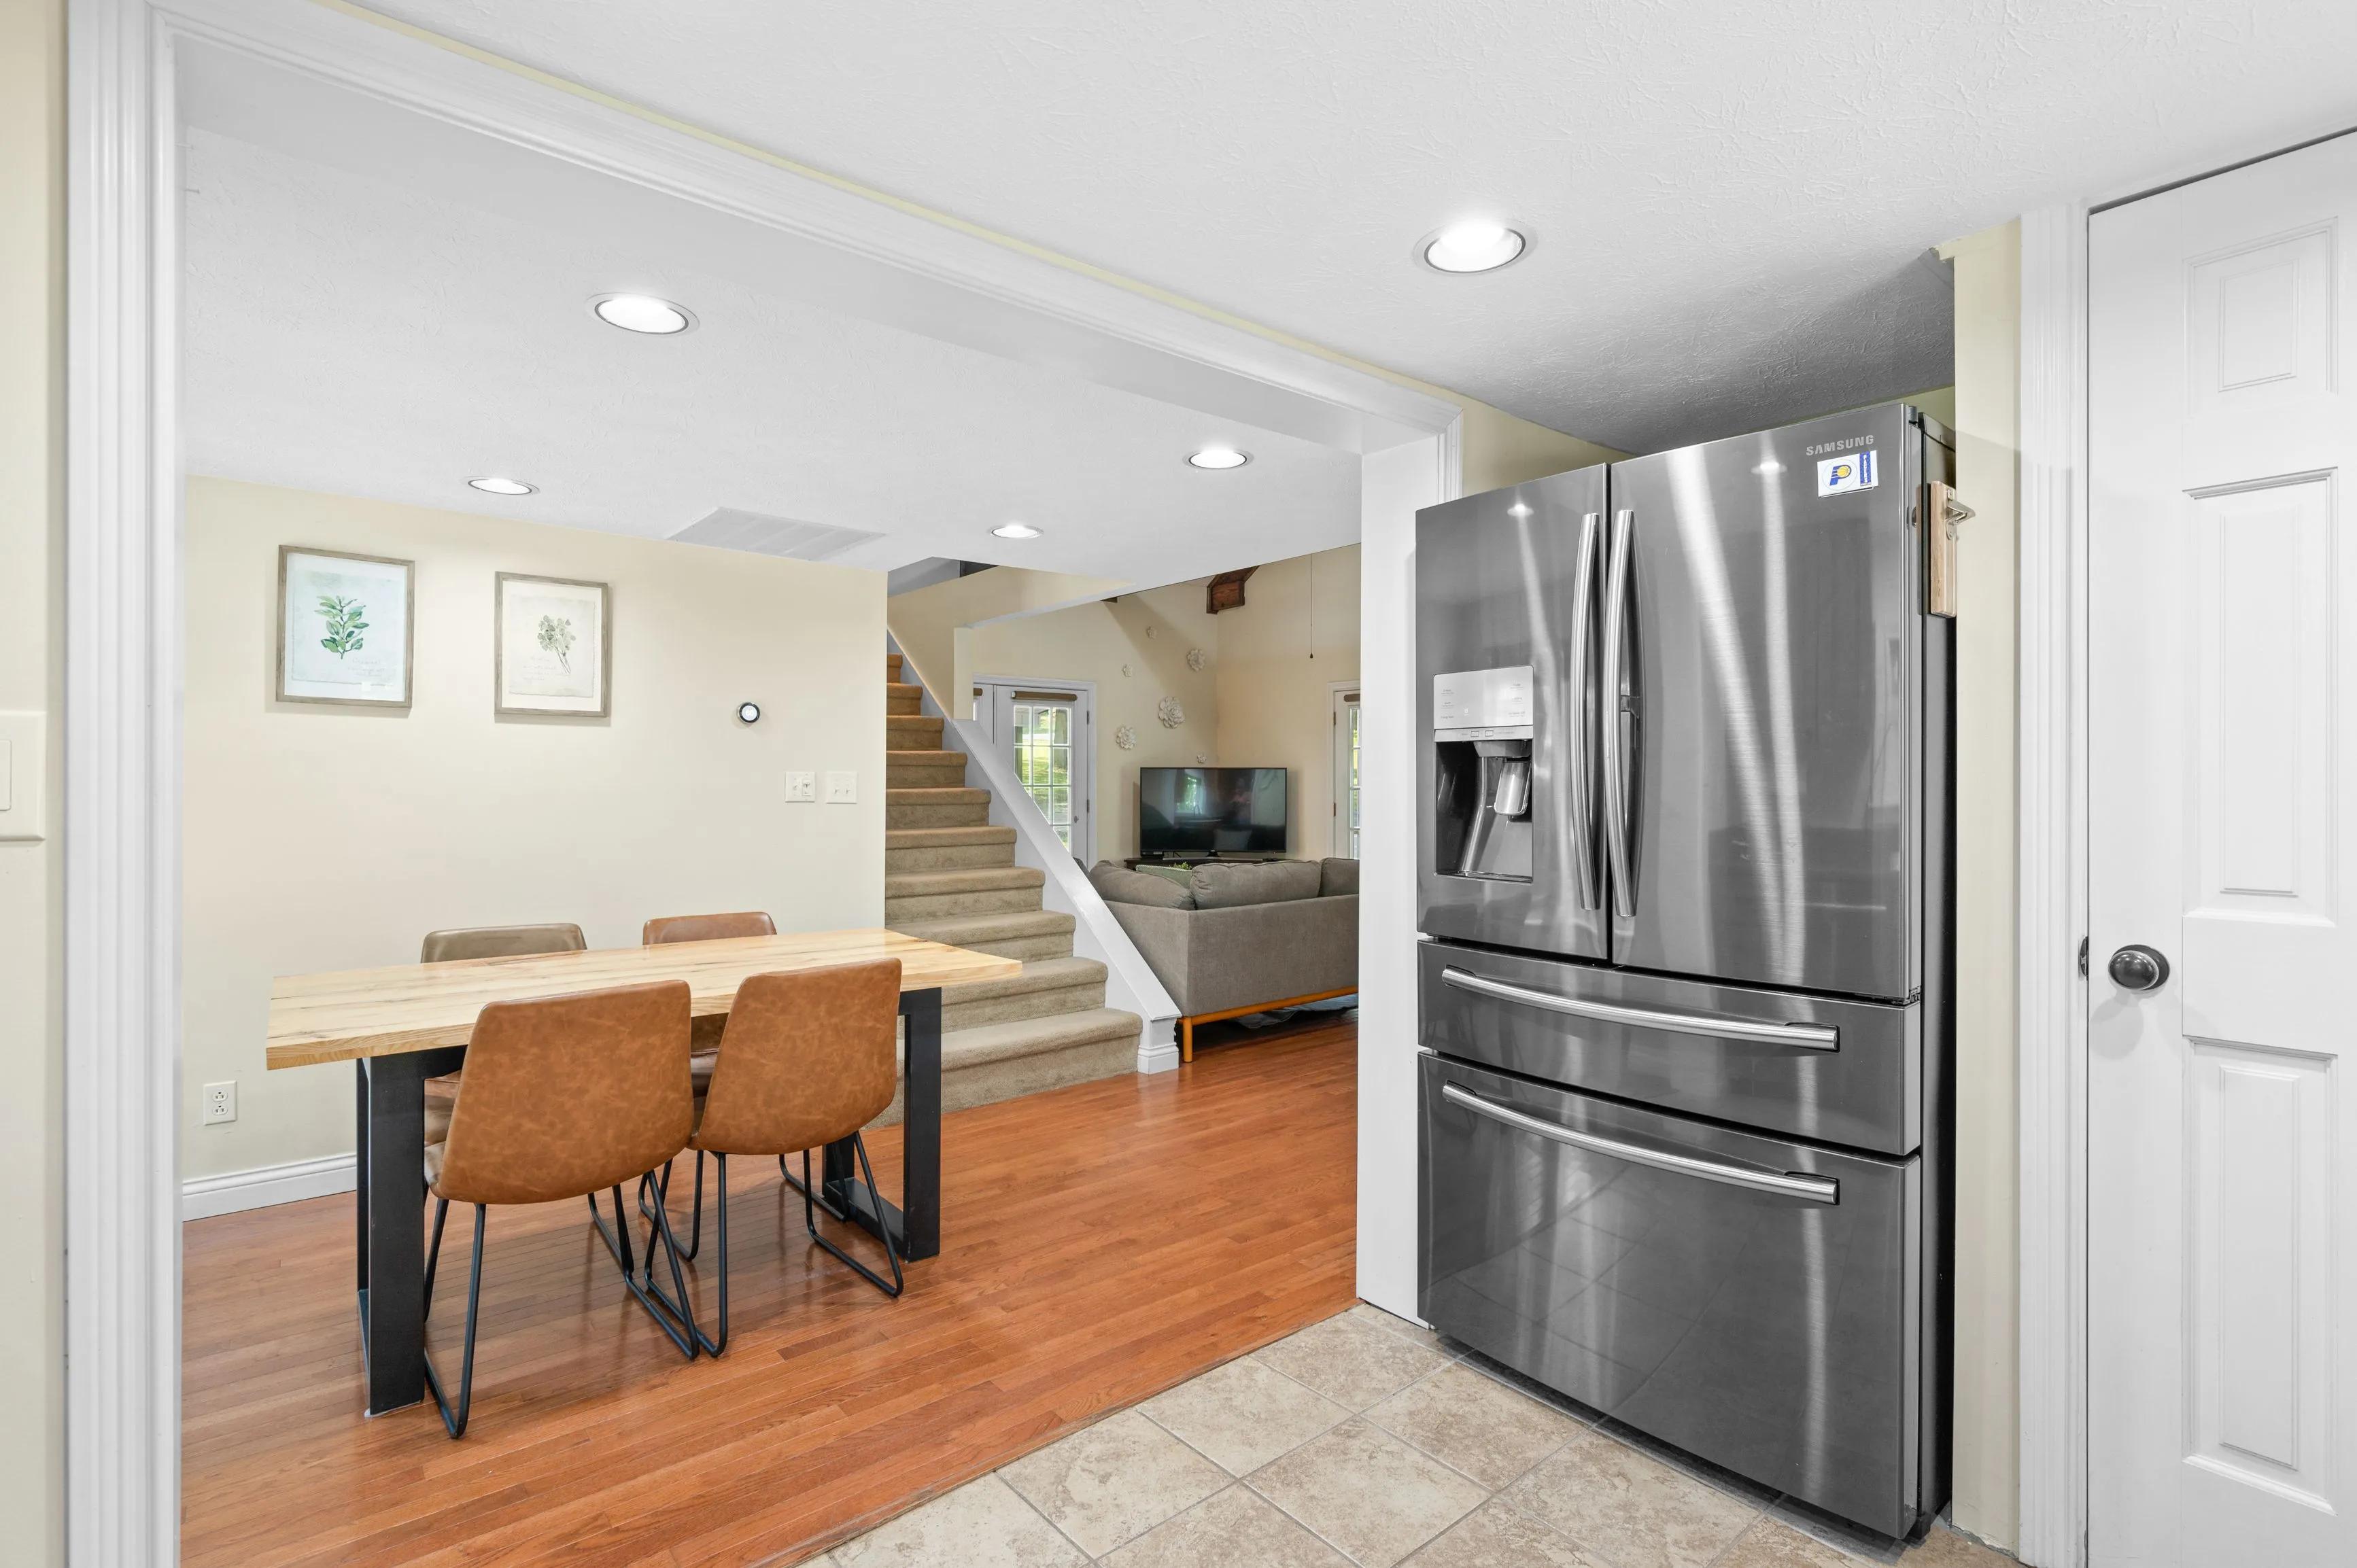 Modern kitchen interior with stainless steel refrigerator, dining table, and staircase in the background.